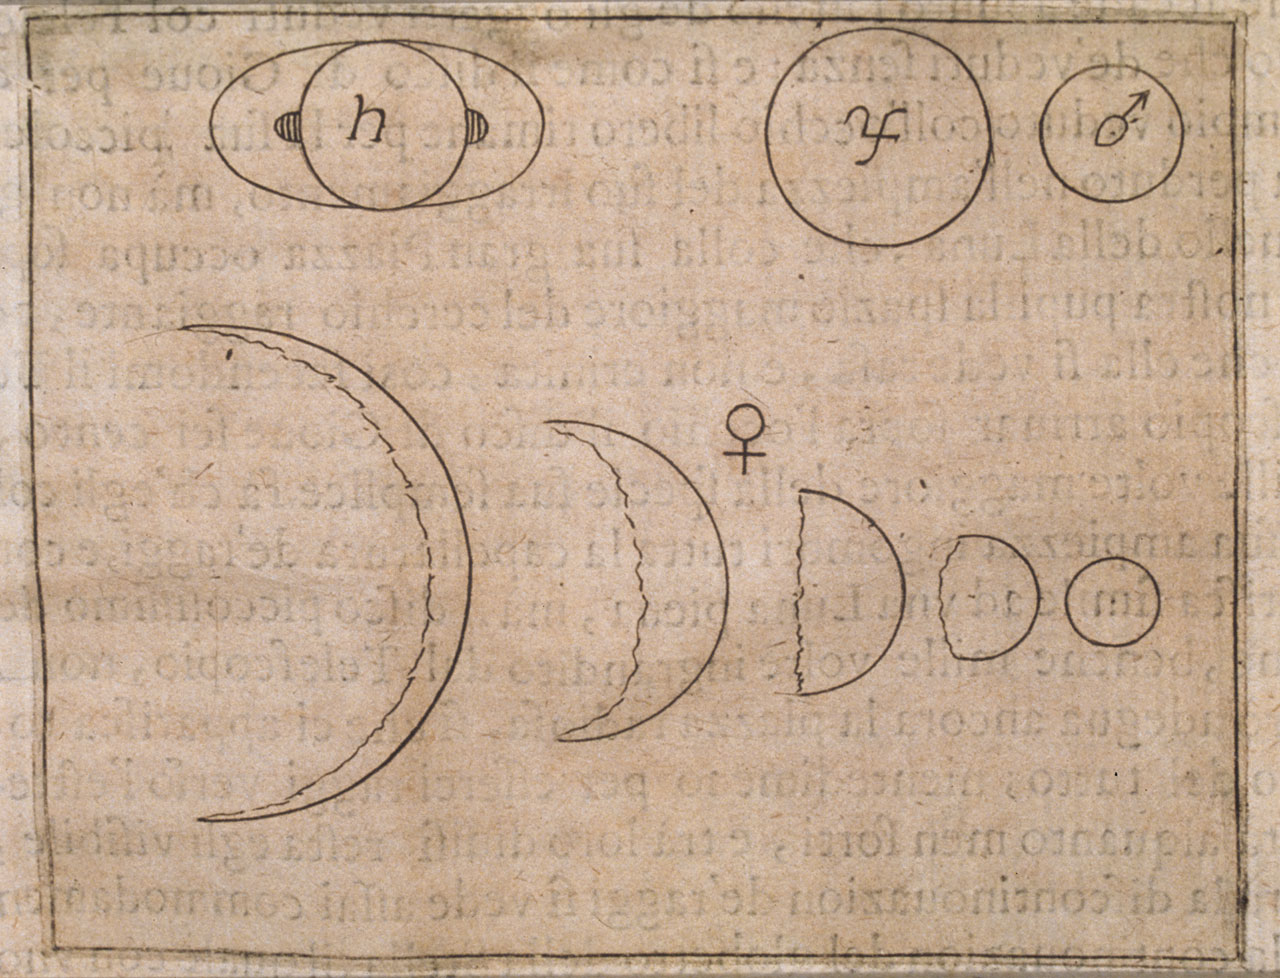 The phases of Venus seen by Galileo